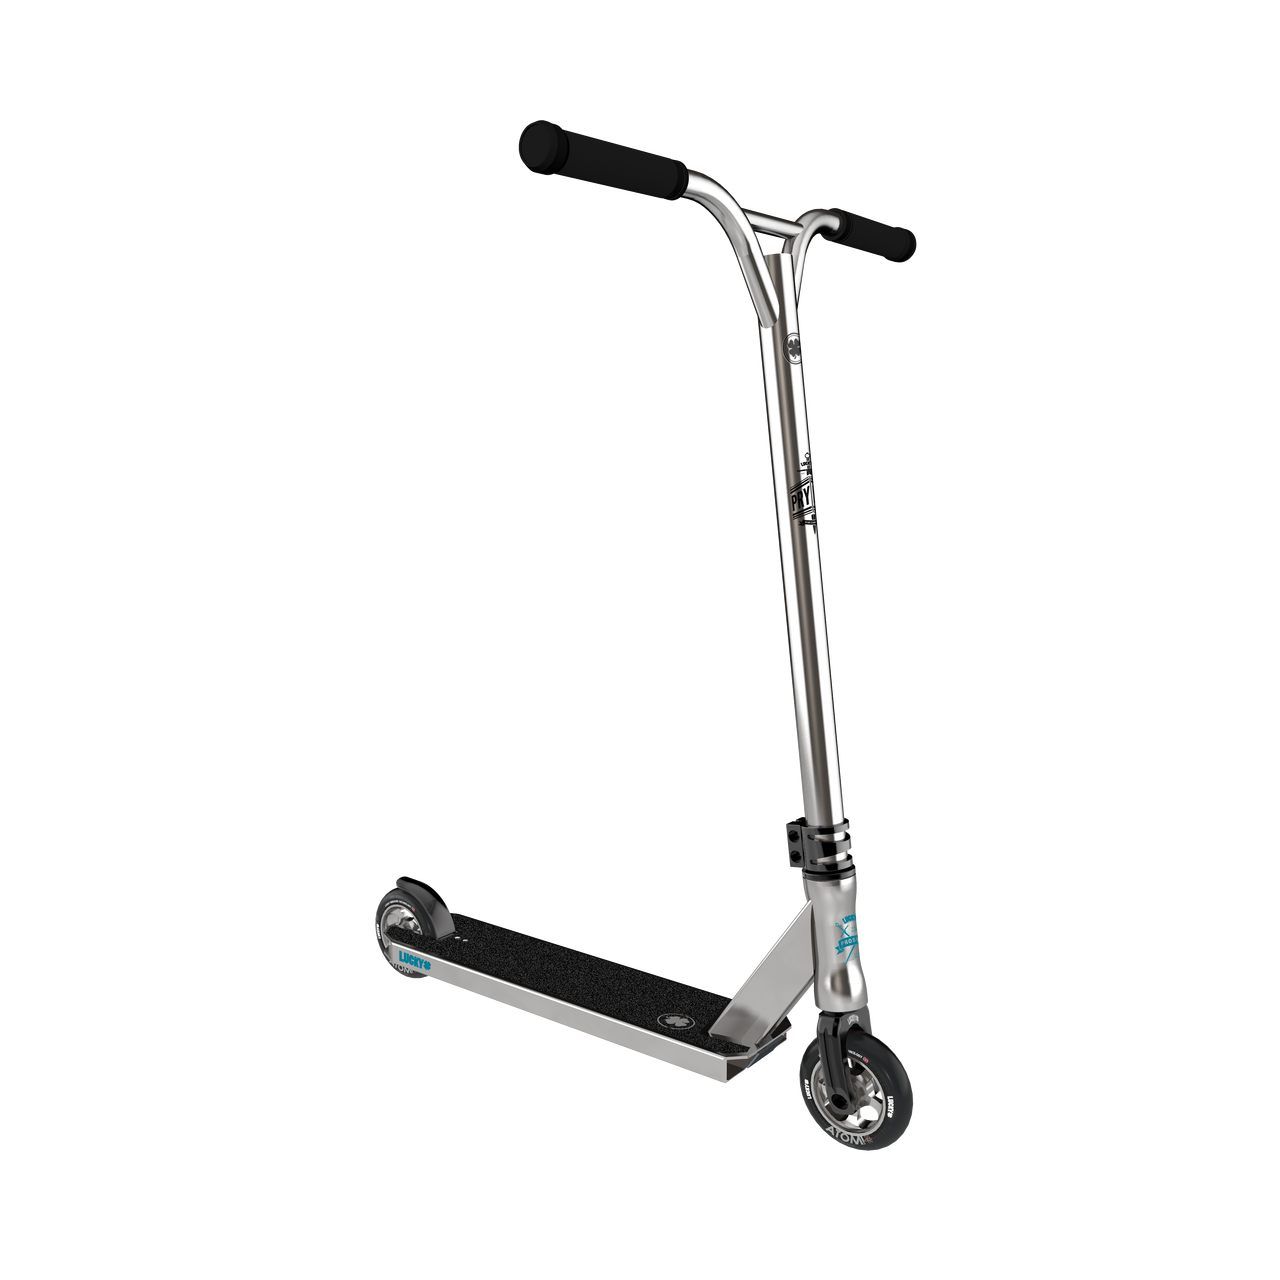 Kick Scooter PNG Free Image